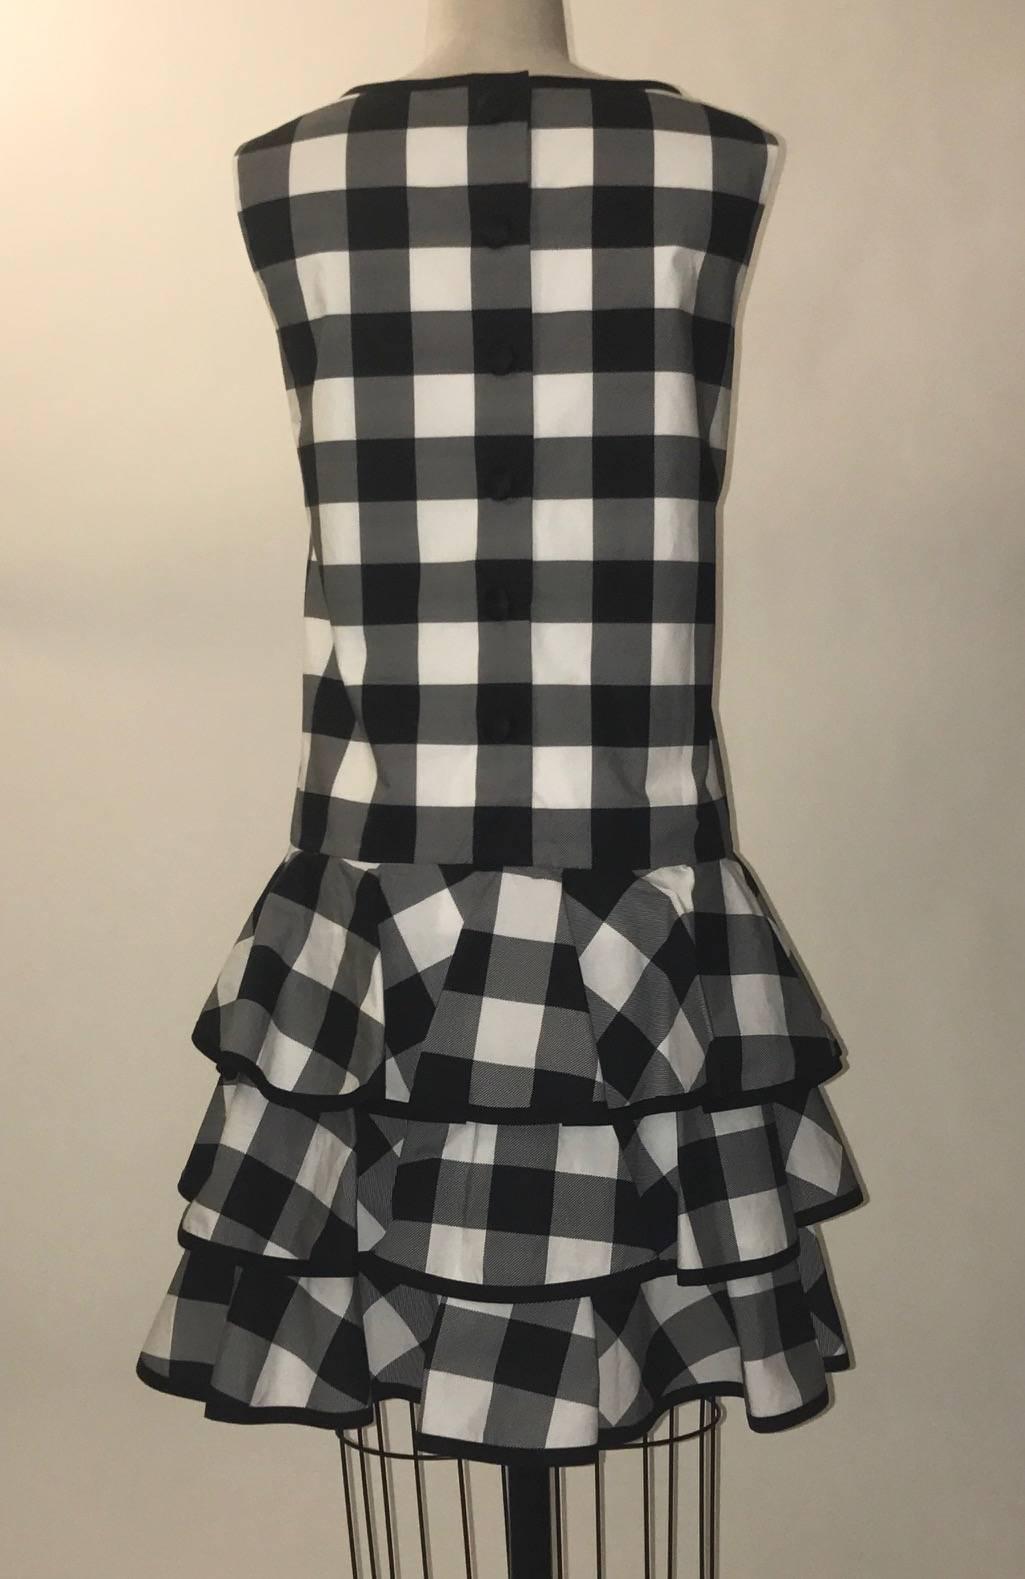 Dolce & Gabbana black and white checked sleeveless sundress with three tiers of ruffles at skirt. Black cloth covered snaps at back.

100% cotton.
Lined at top in 100% cotton.

Made in Italy.

IT 44, US 8. See measurements.
Bust 38